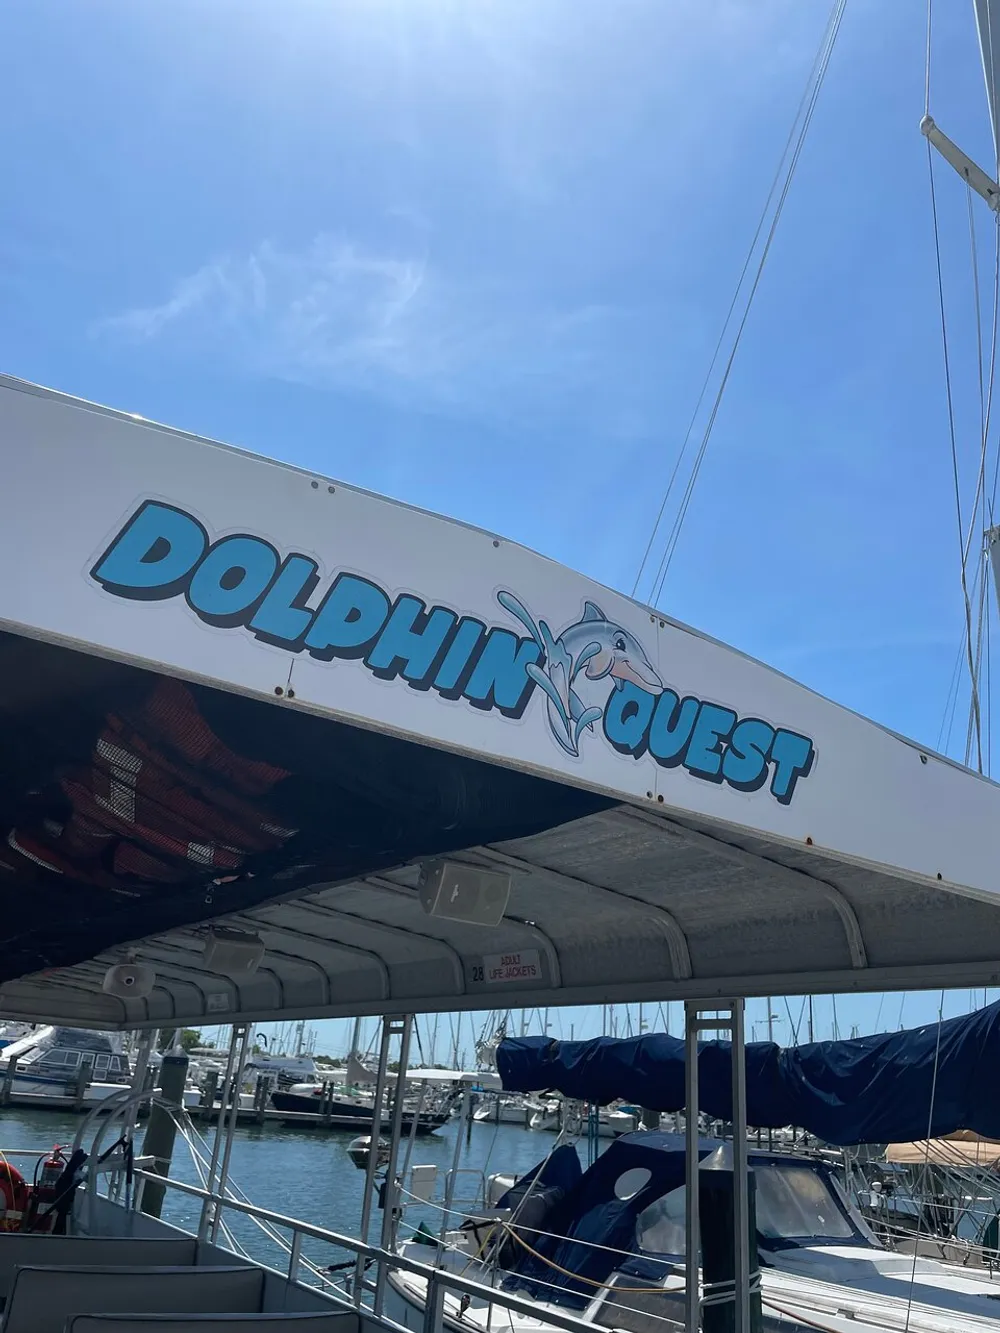 The image shows the side of a boat named Dolphin Quest docked at a marina with clear blue skies above and various other boats in the background